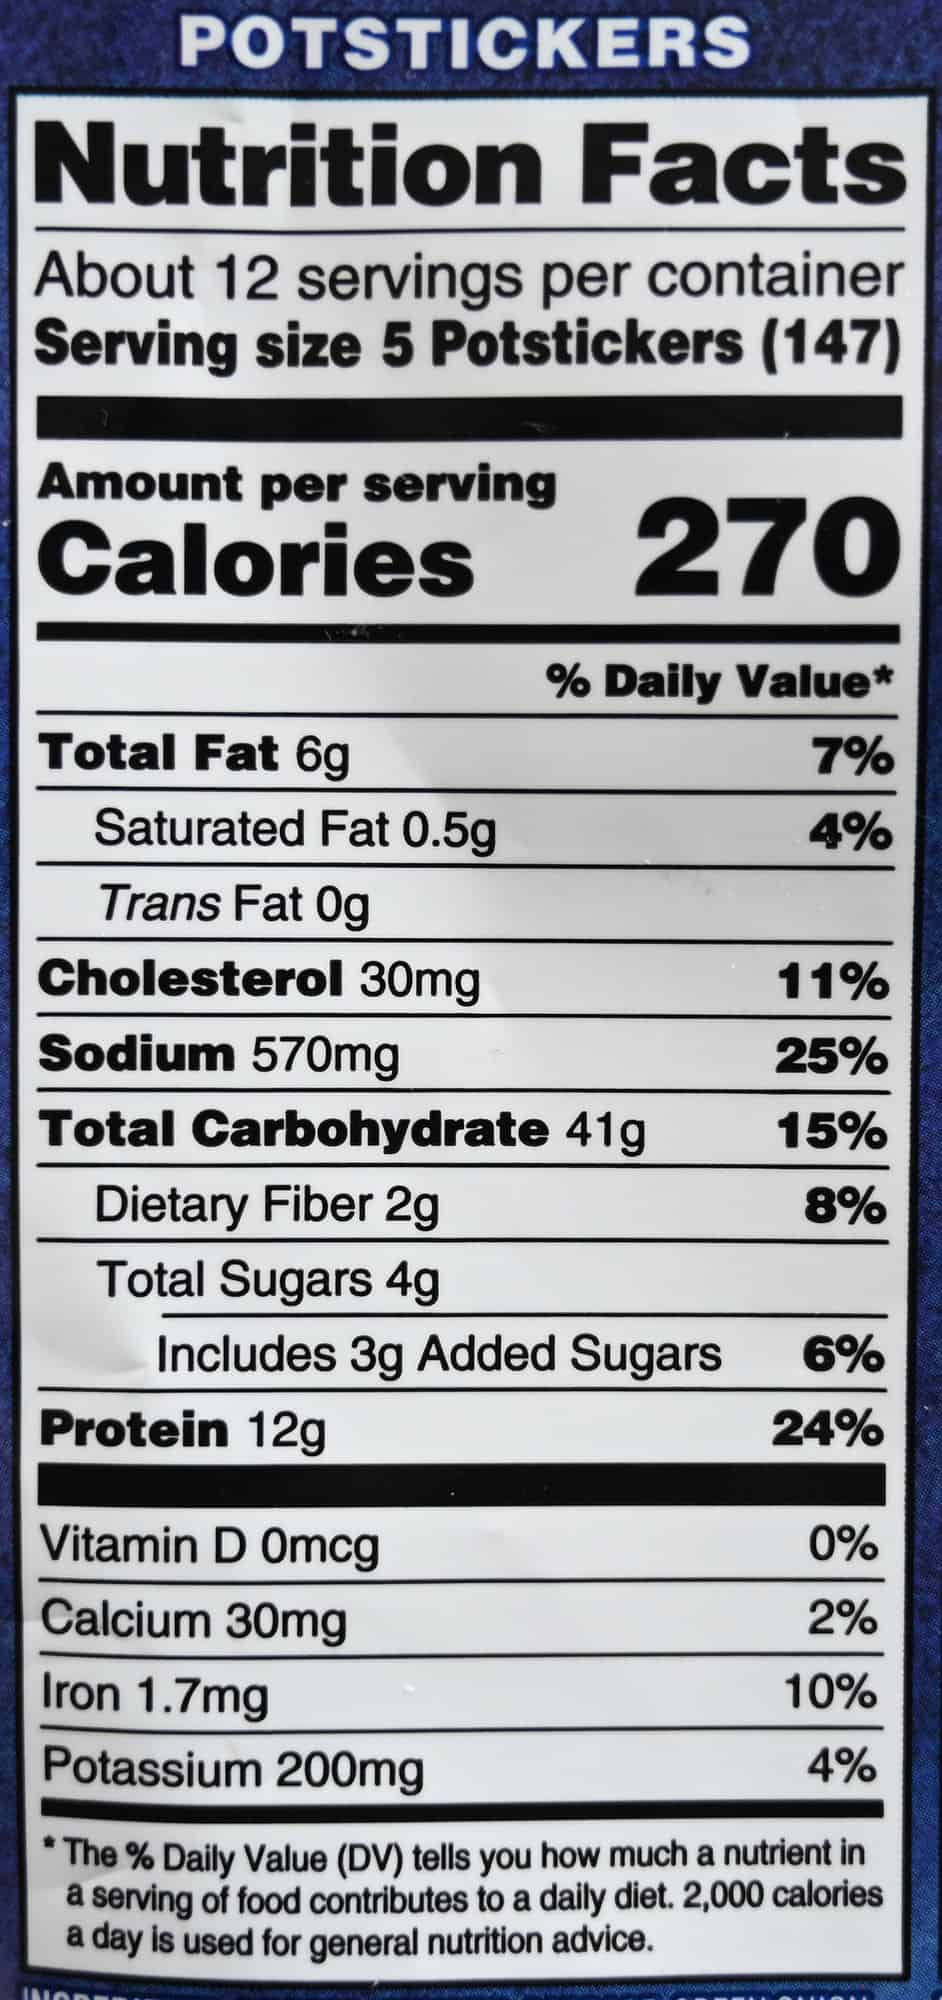 Image of the potstickers nutrition facts from the back of the bag.